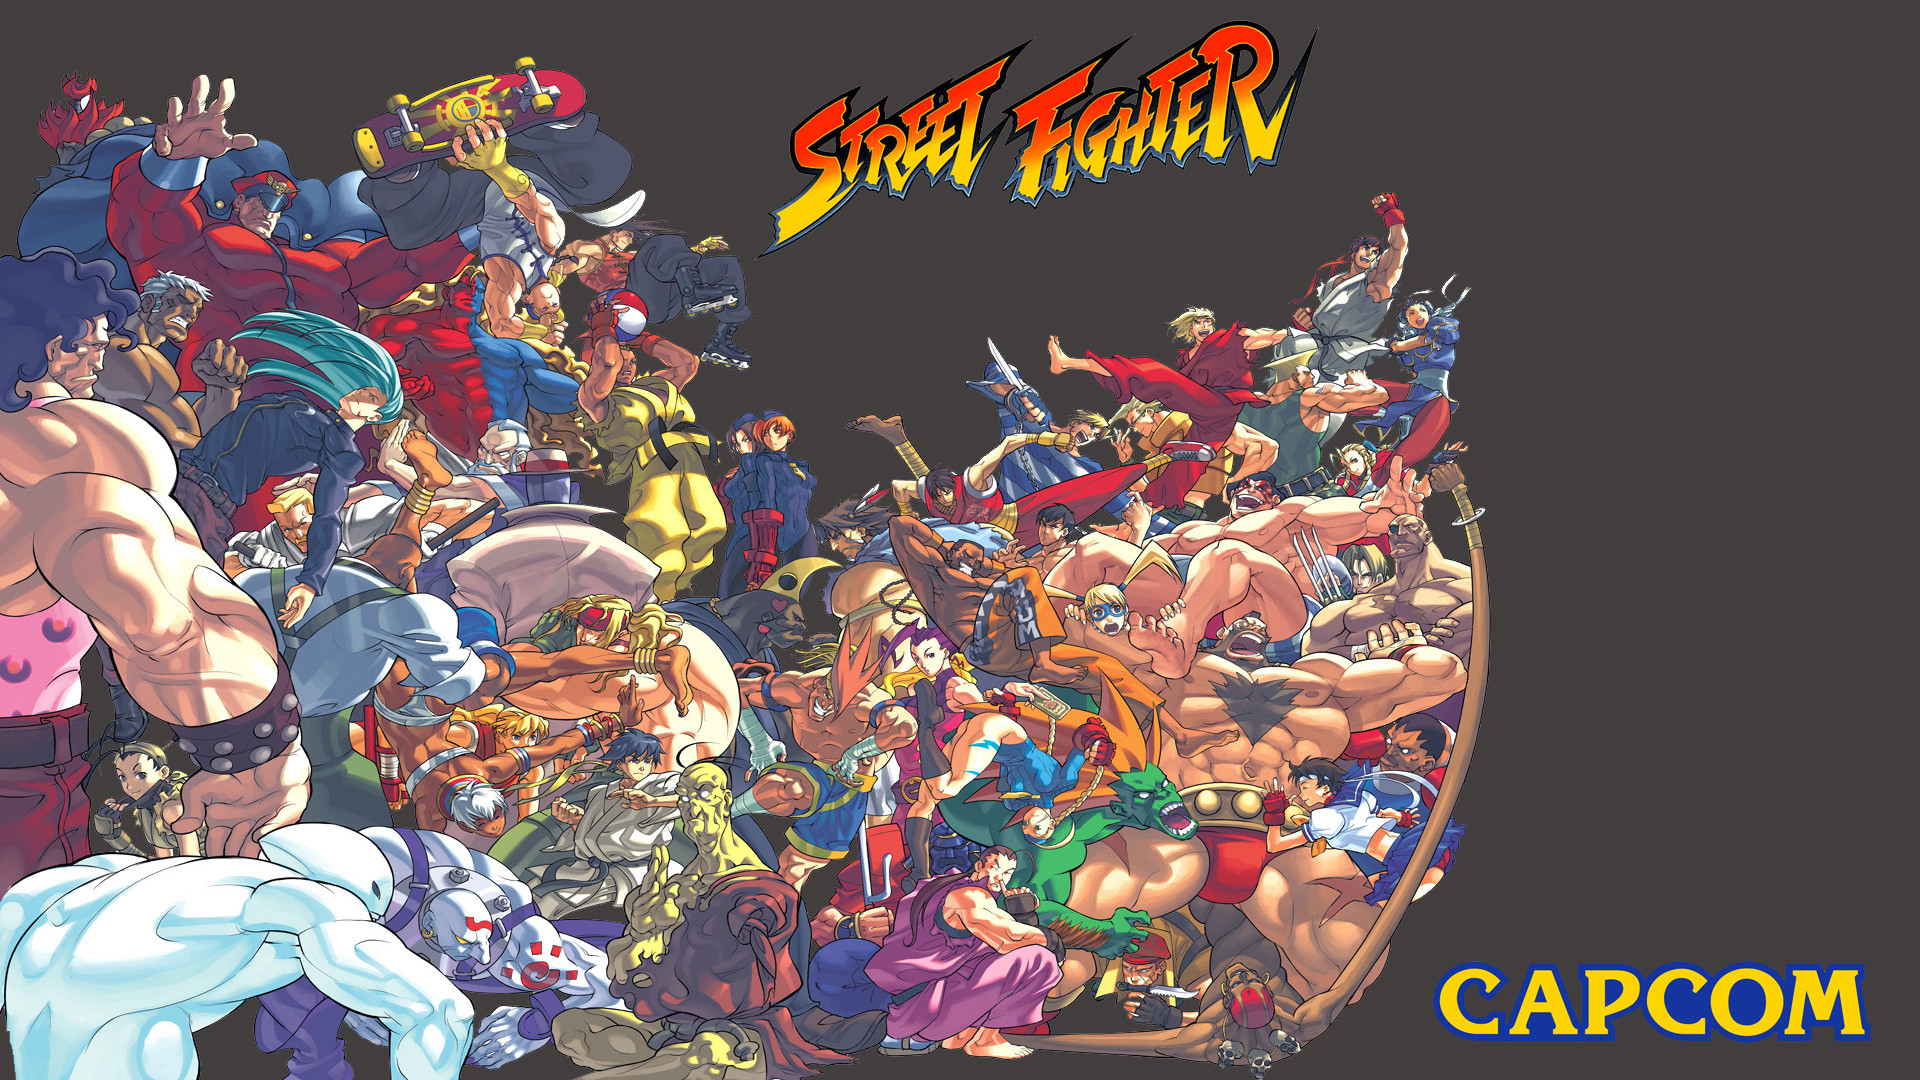 1920x1080 Street Fighter Wallpaper 1080p by mau5traP Street Fighter Wallpaper 1080p  by mau5traP